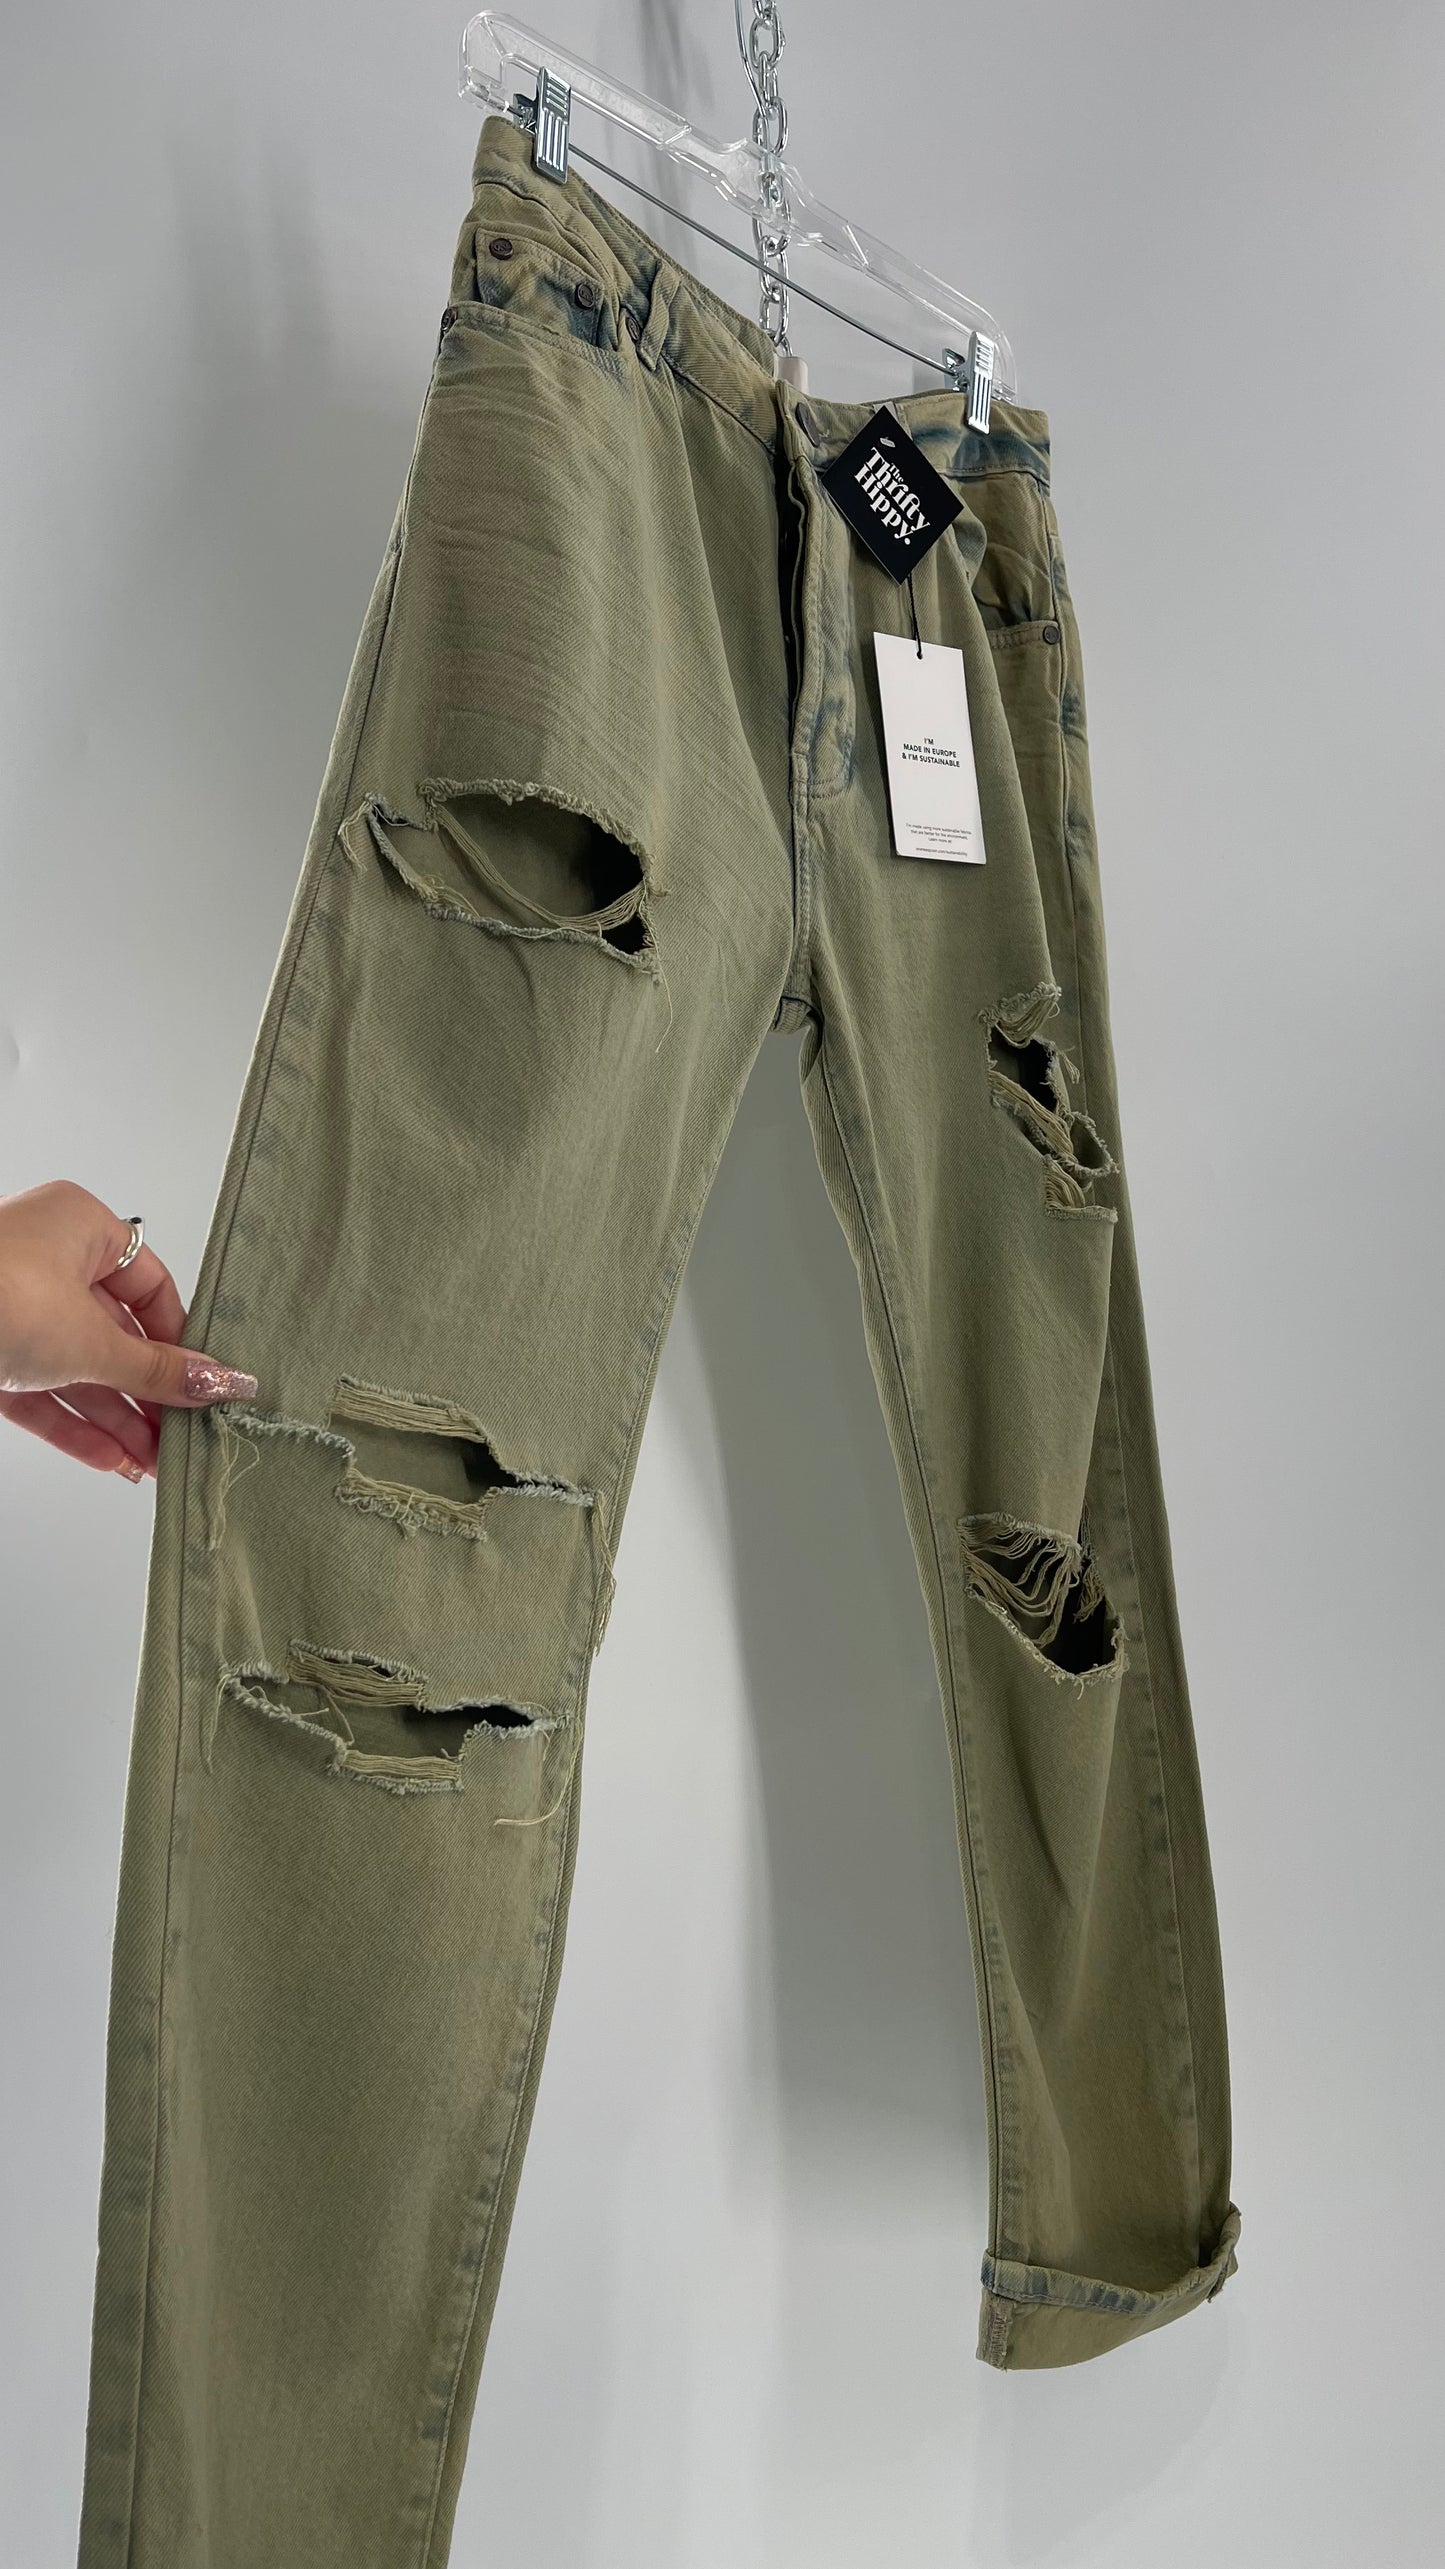 One Teaspoon Distressed Baggy/Bandit Relaxed Jean with Green Hue/Wash (Khaki Haze) (25)